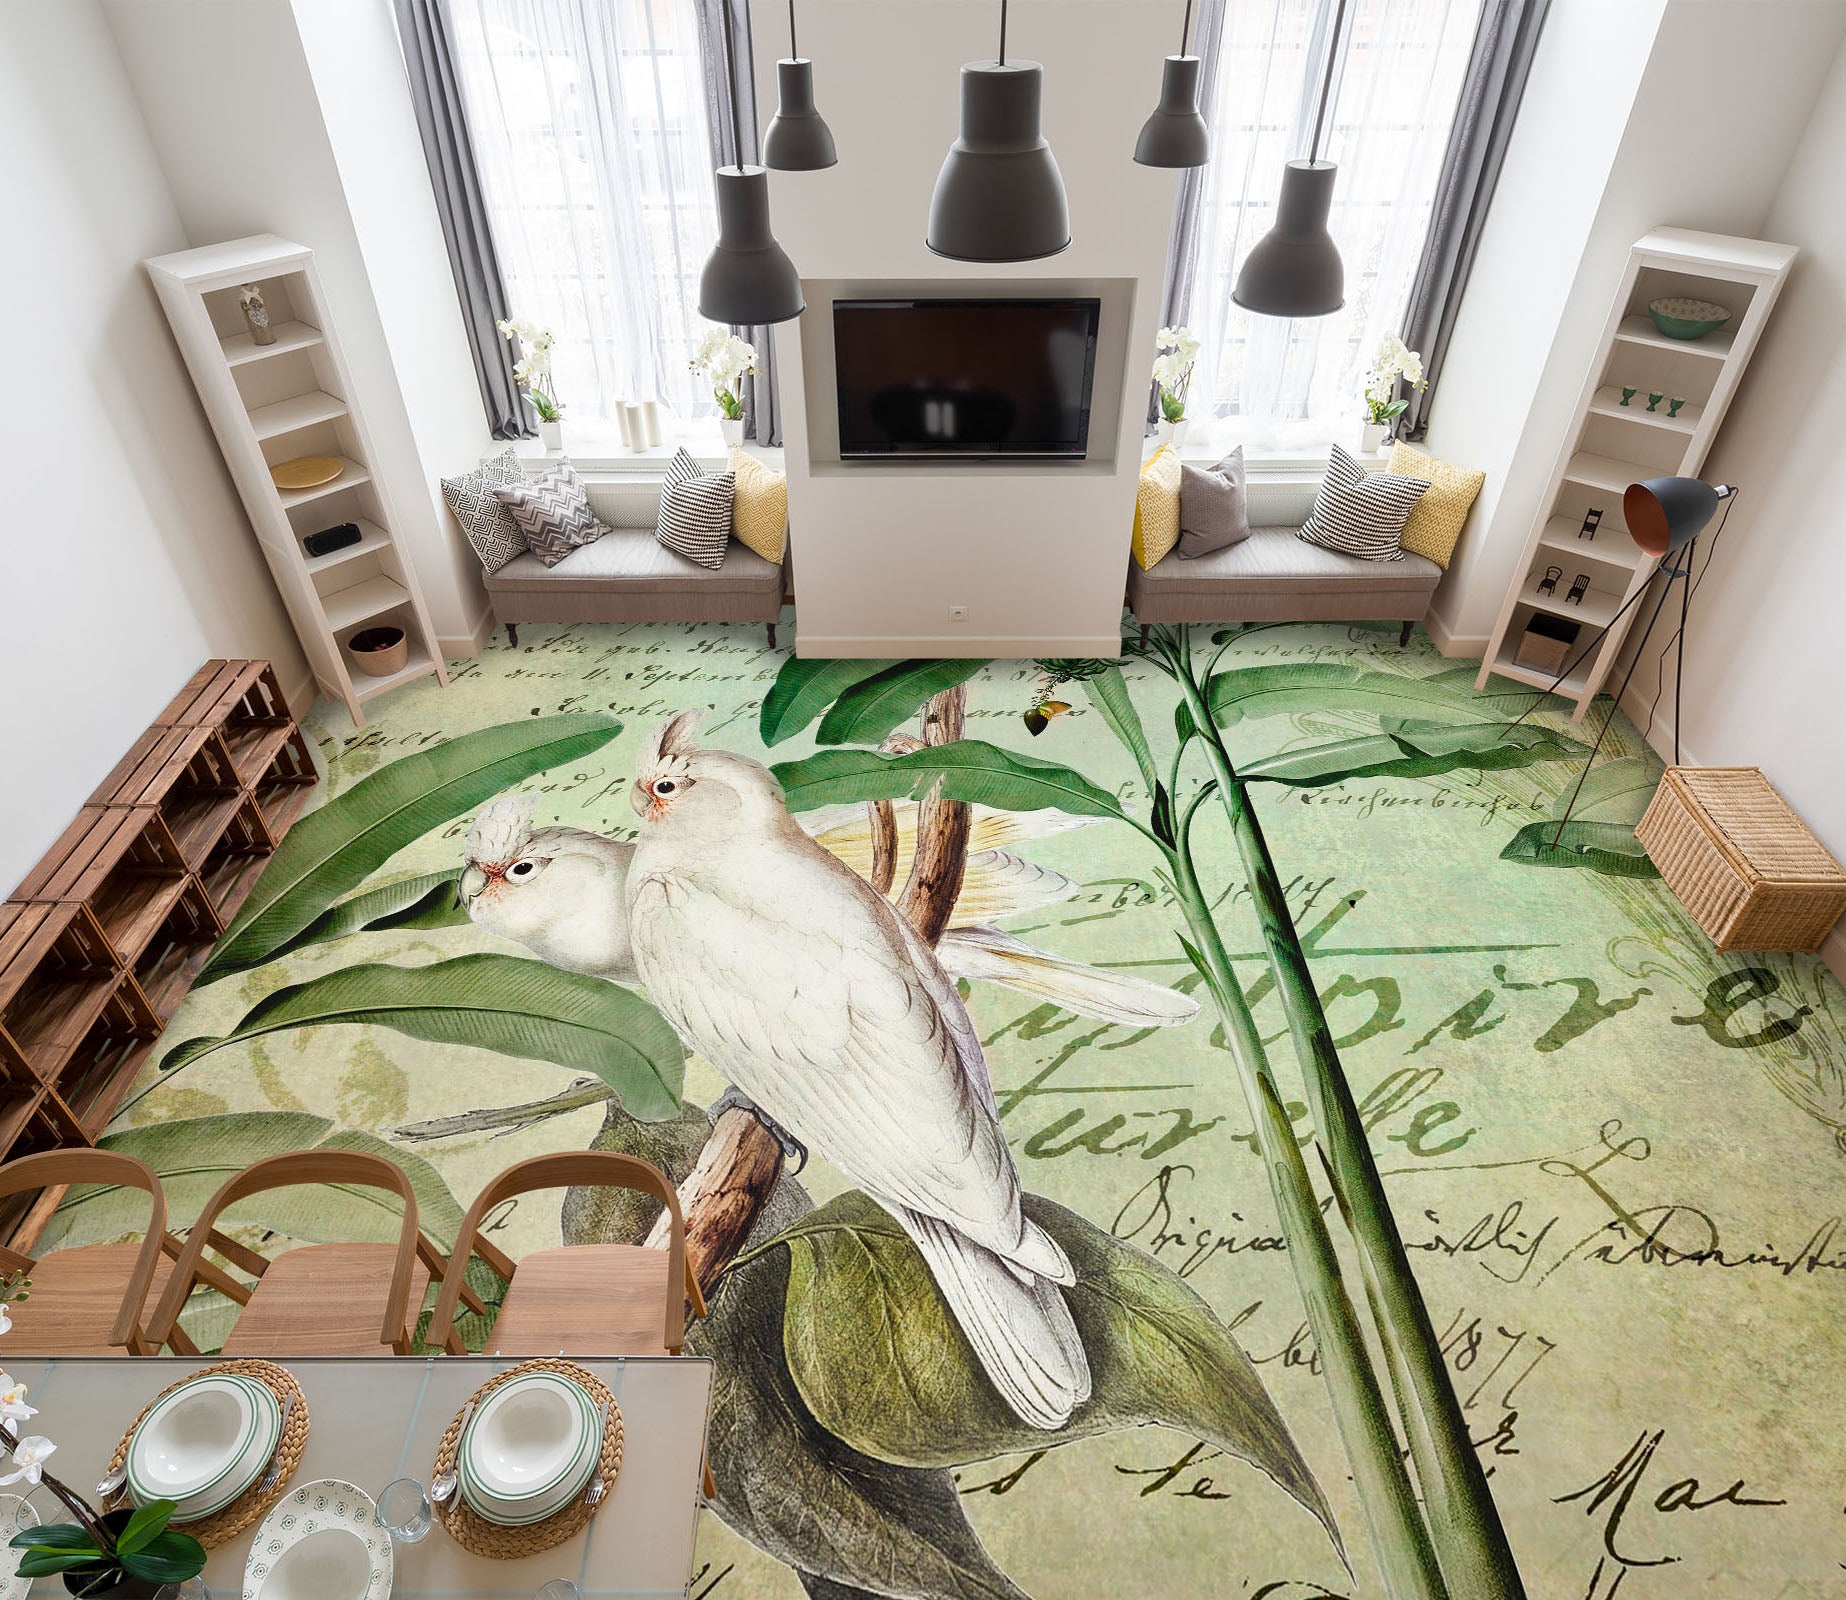 3D White Parrot Leaves 104160 Andrea Haase Floor Mural  Wallpaper Murals Self-Adhesive Removable Print Epoxy